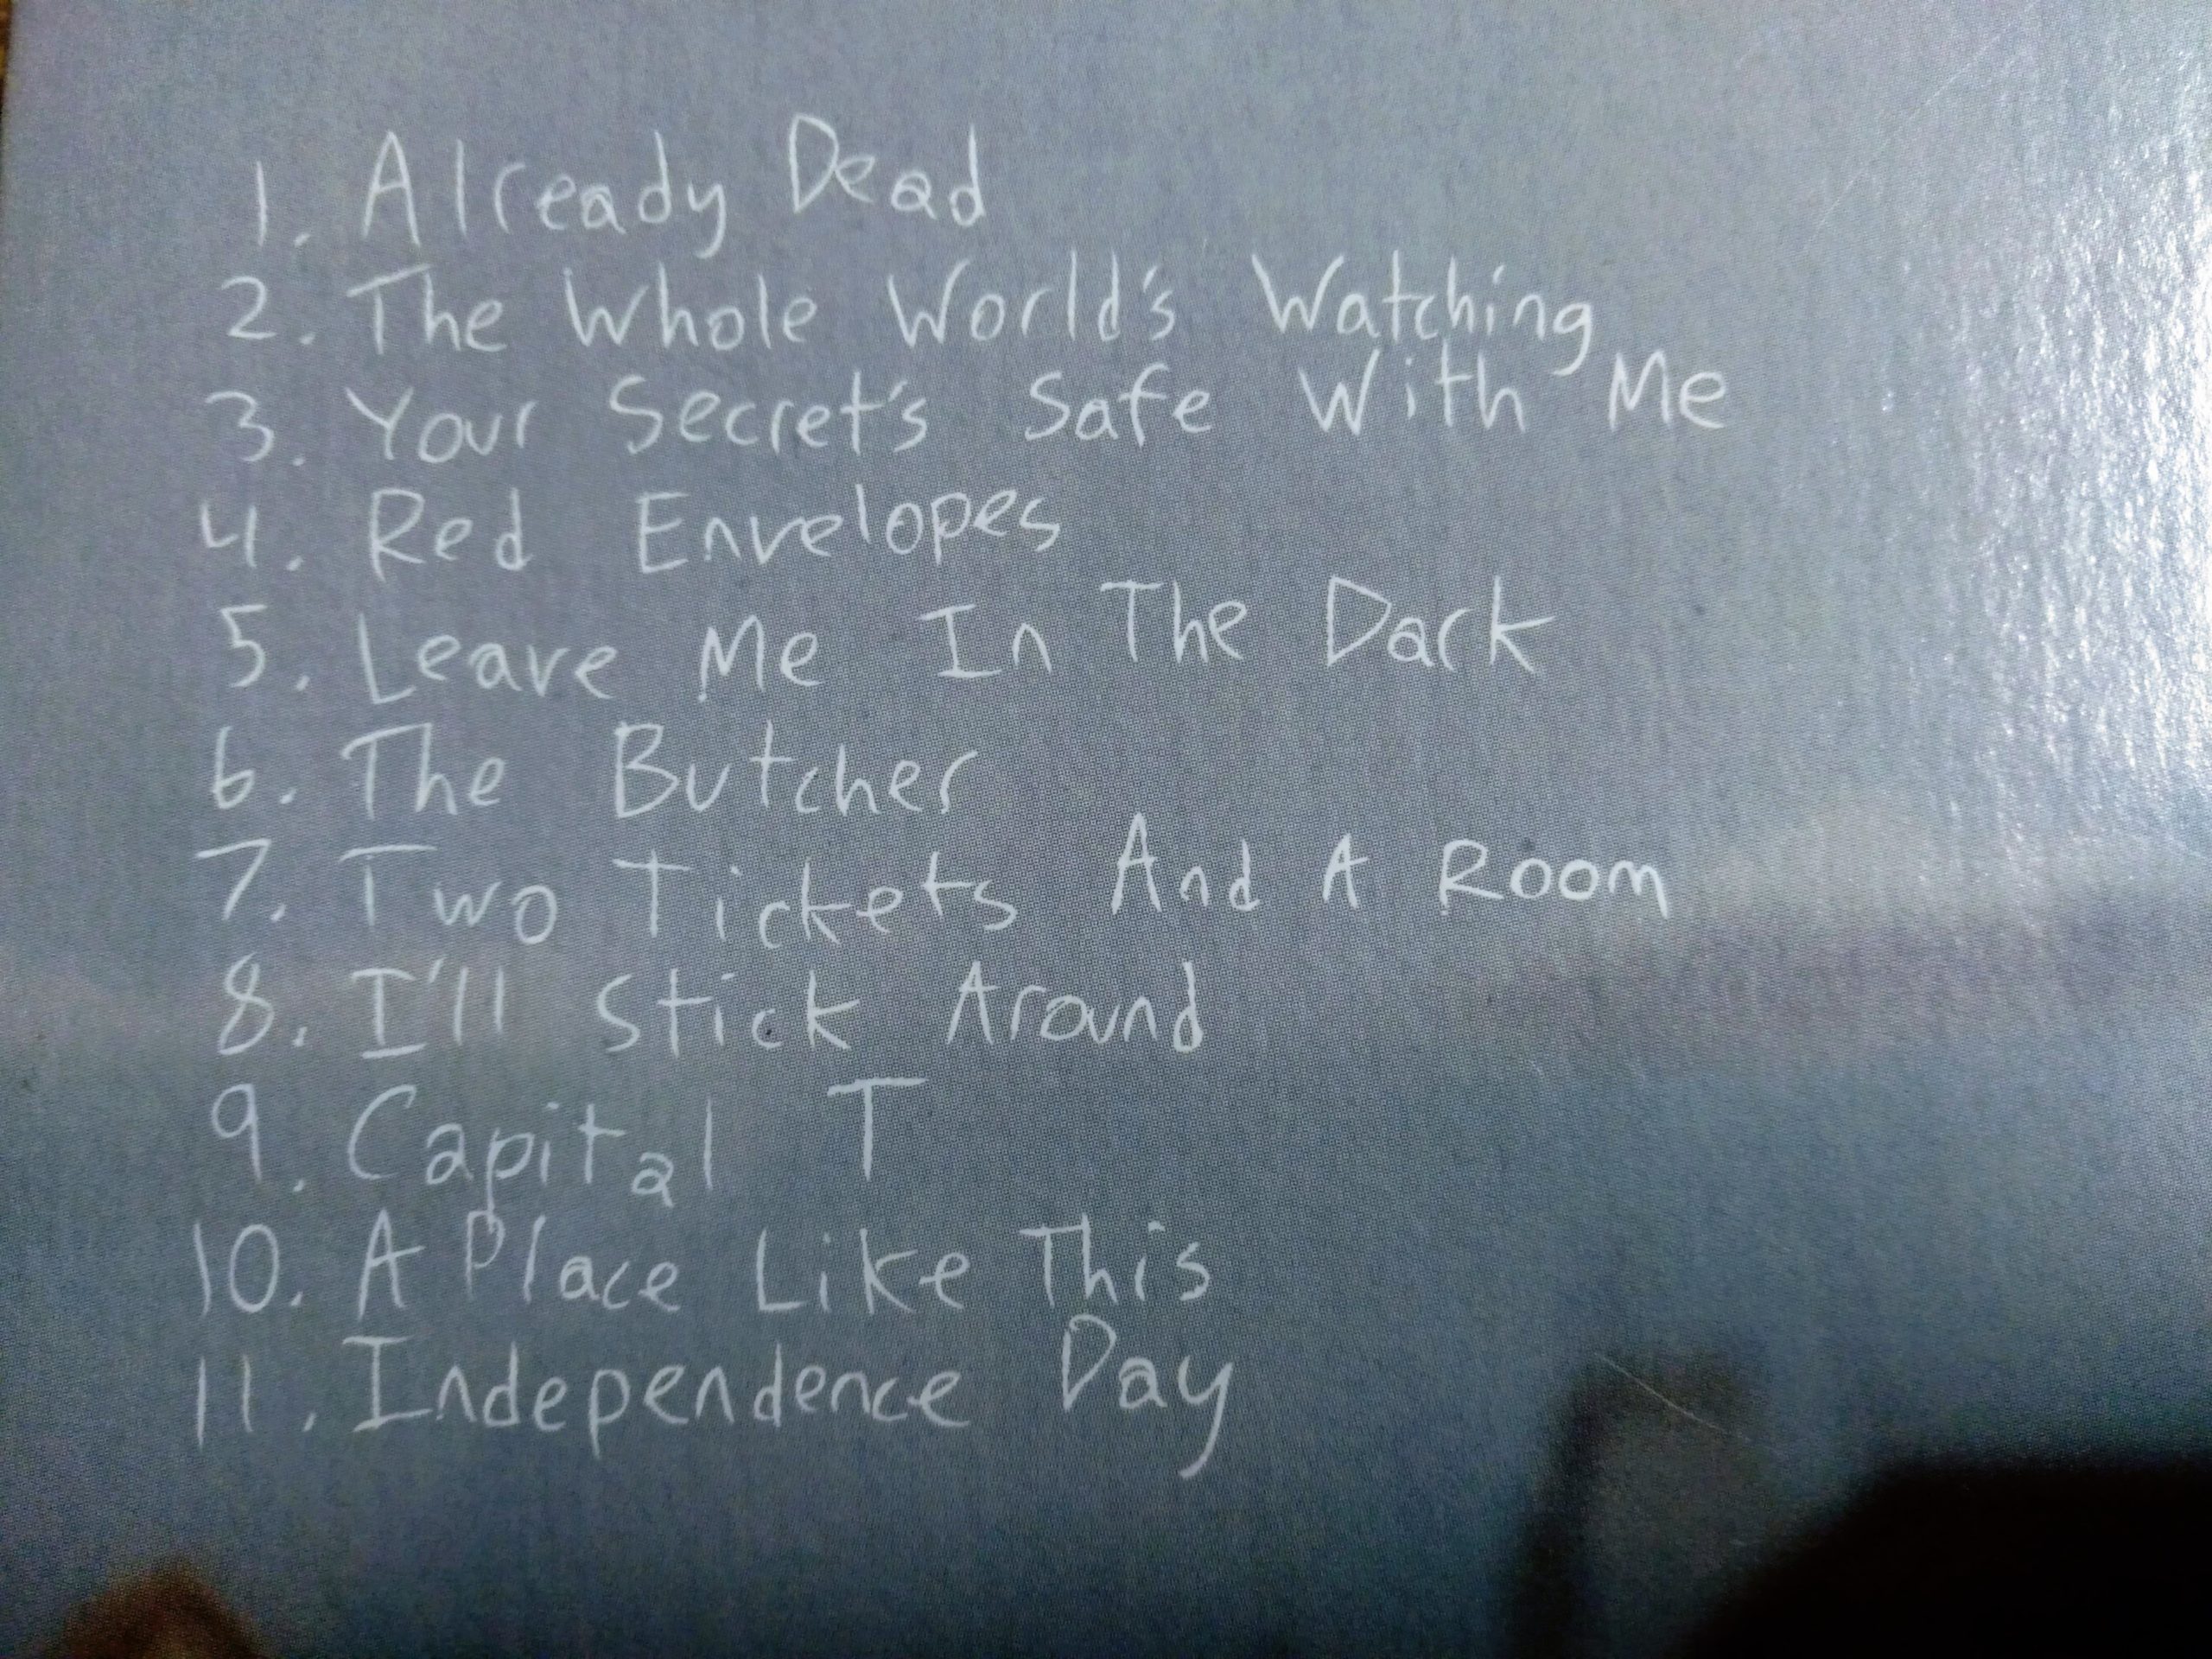 Walking Papers CD back cover song list